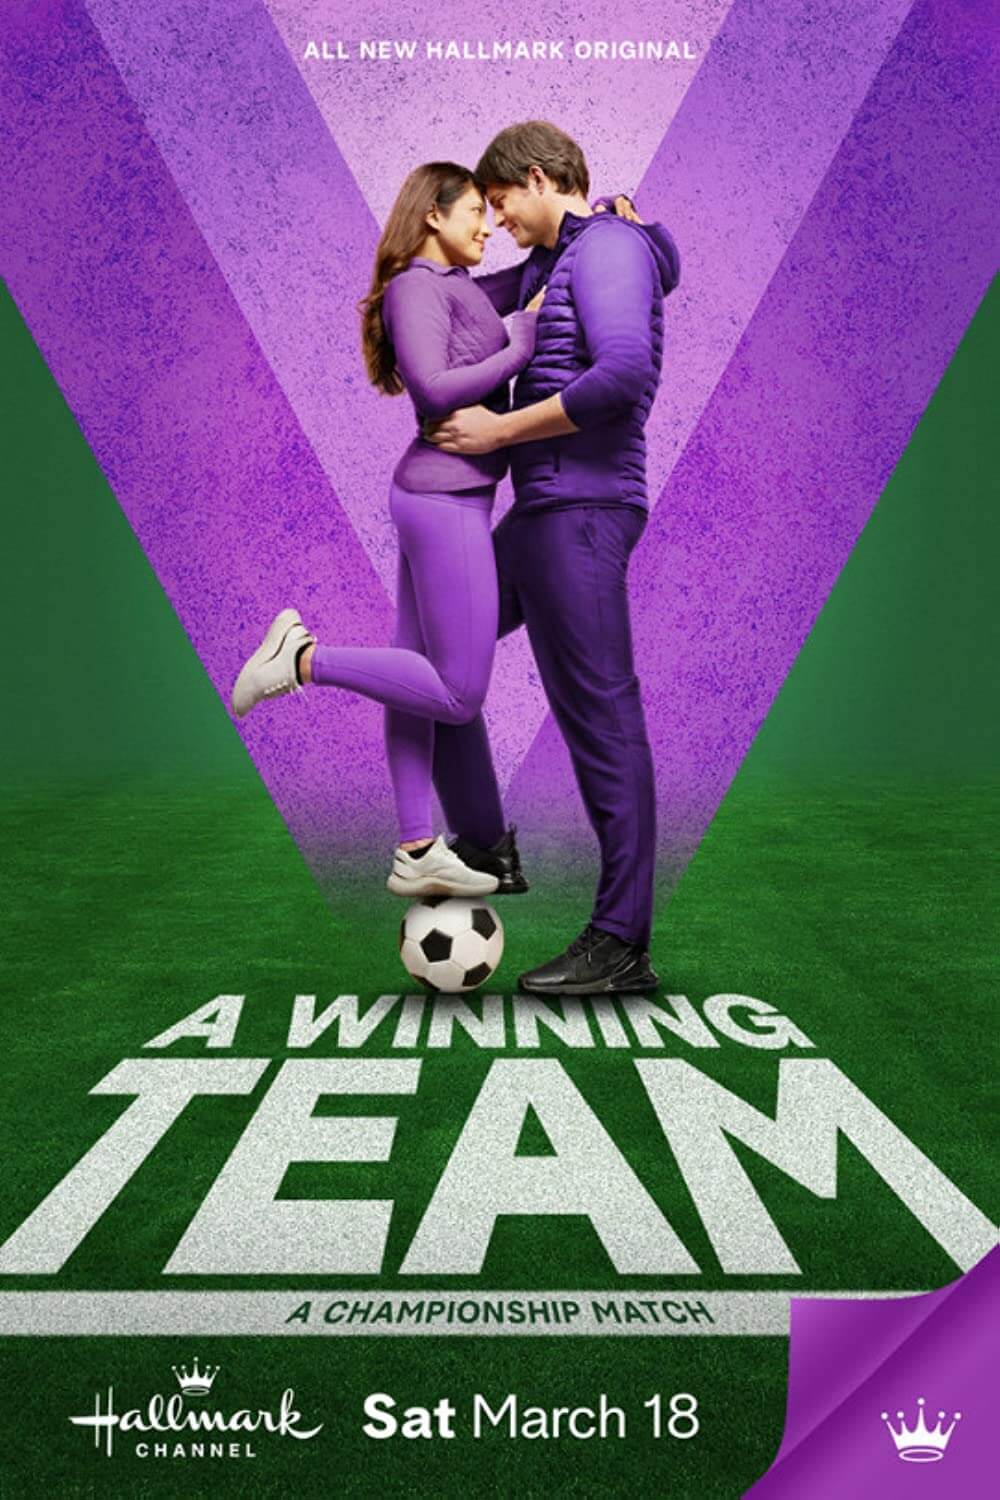 Who Are The Cast in 'A Winning Team'? Full Cast and Crew list of